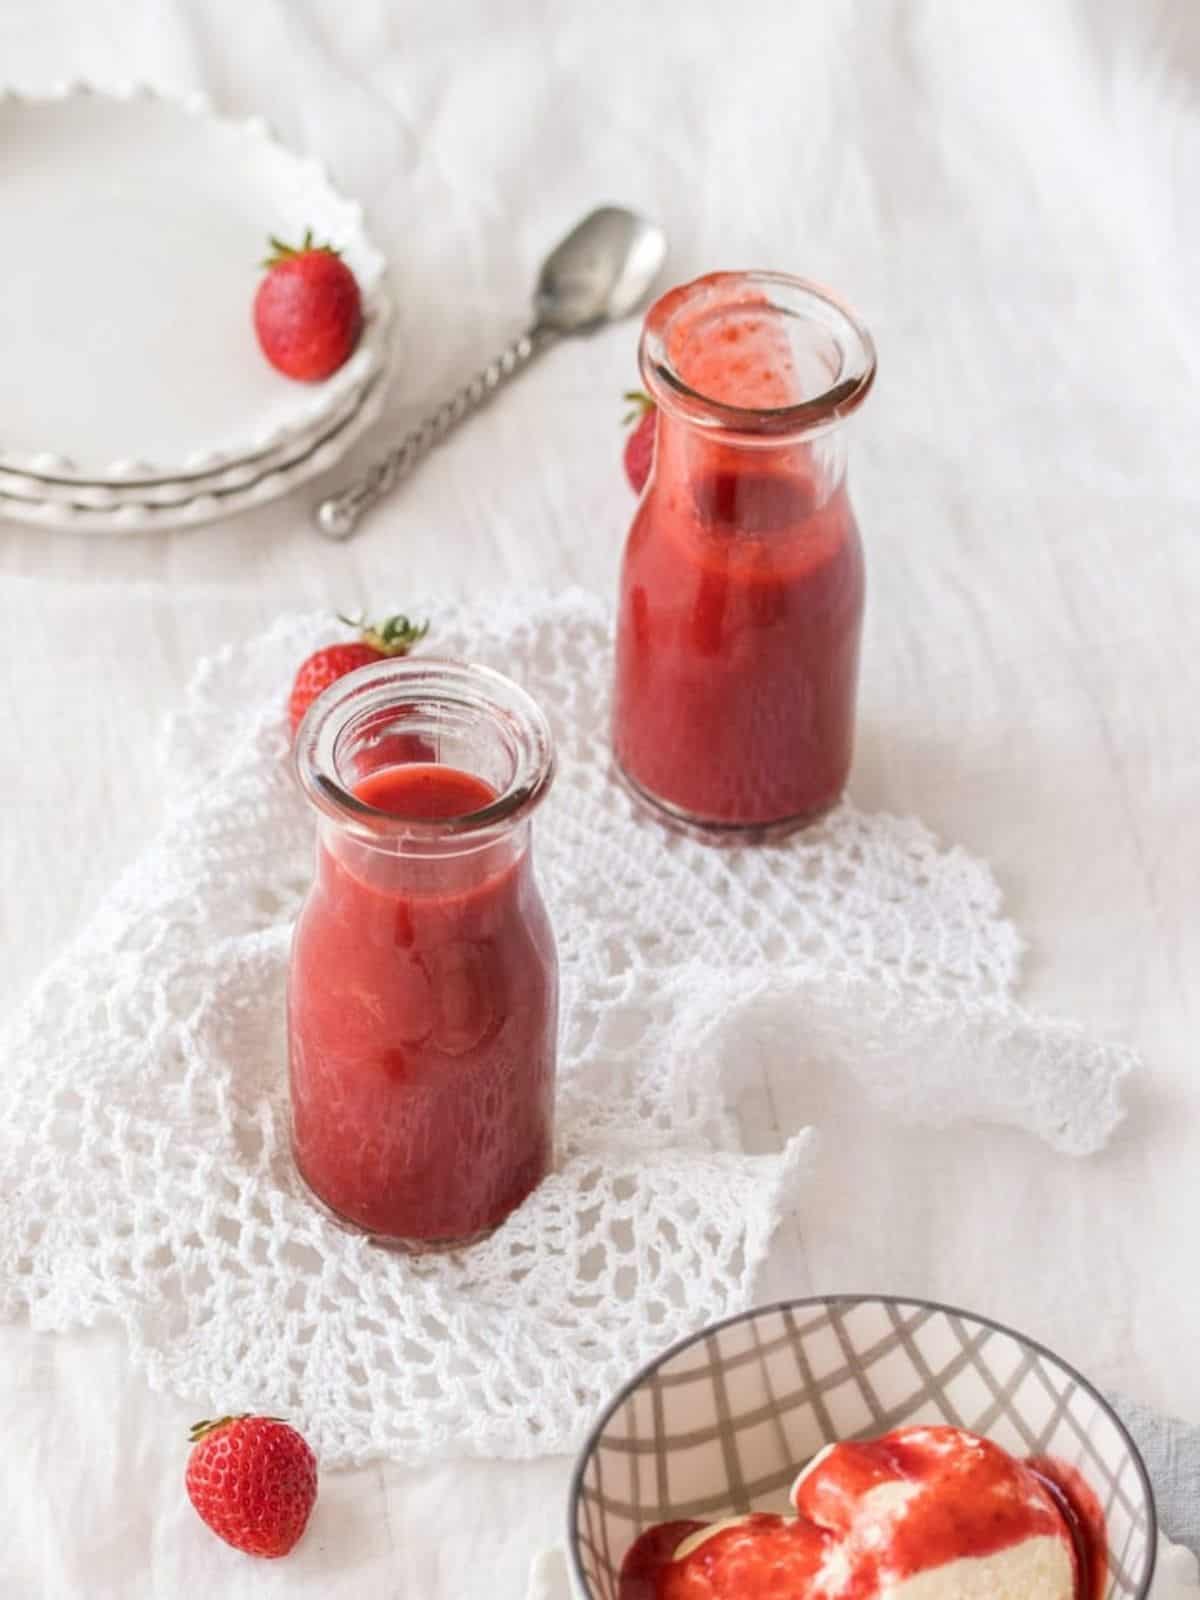 Strawberry sauce in two glass jars.